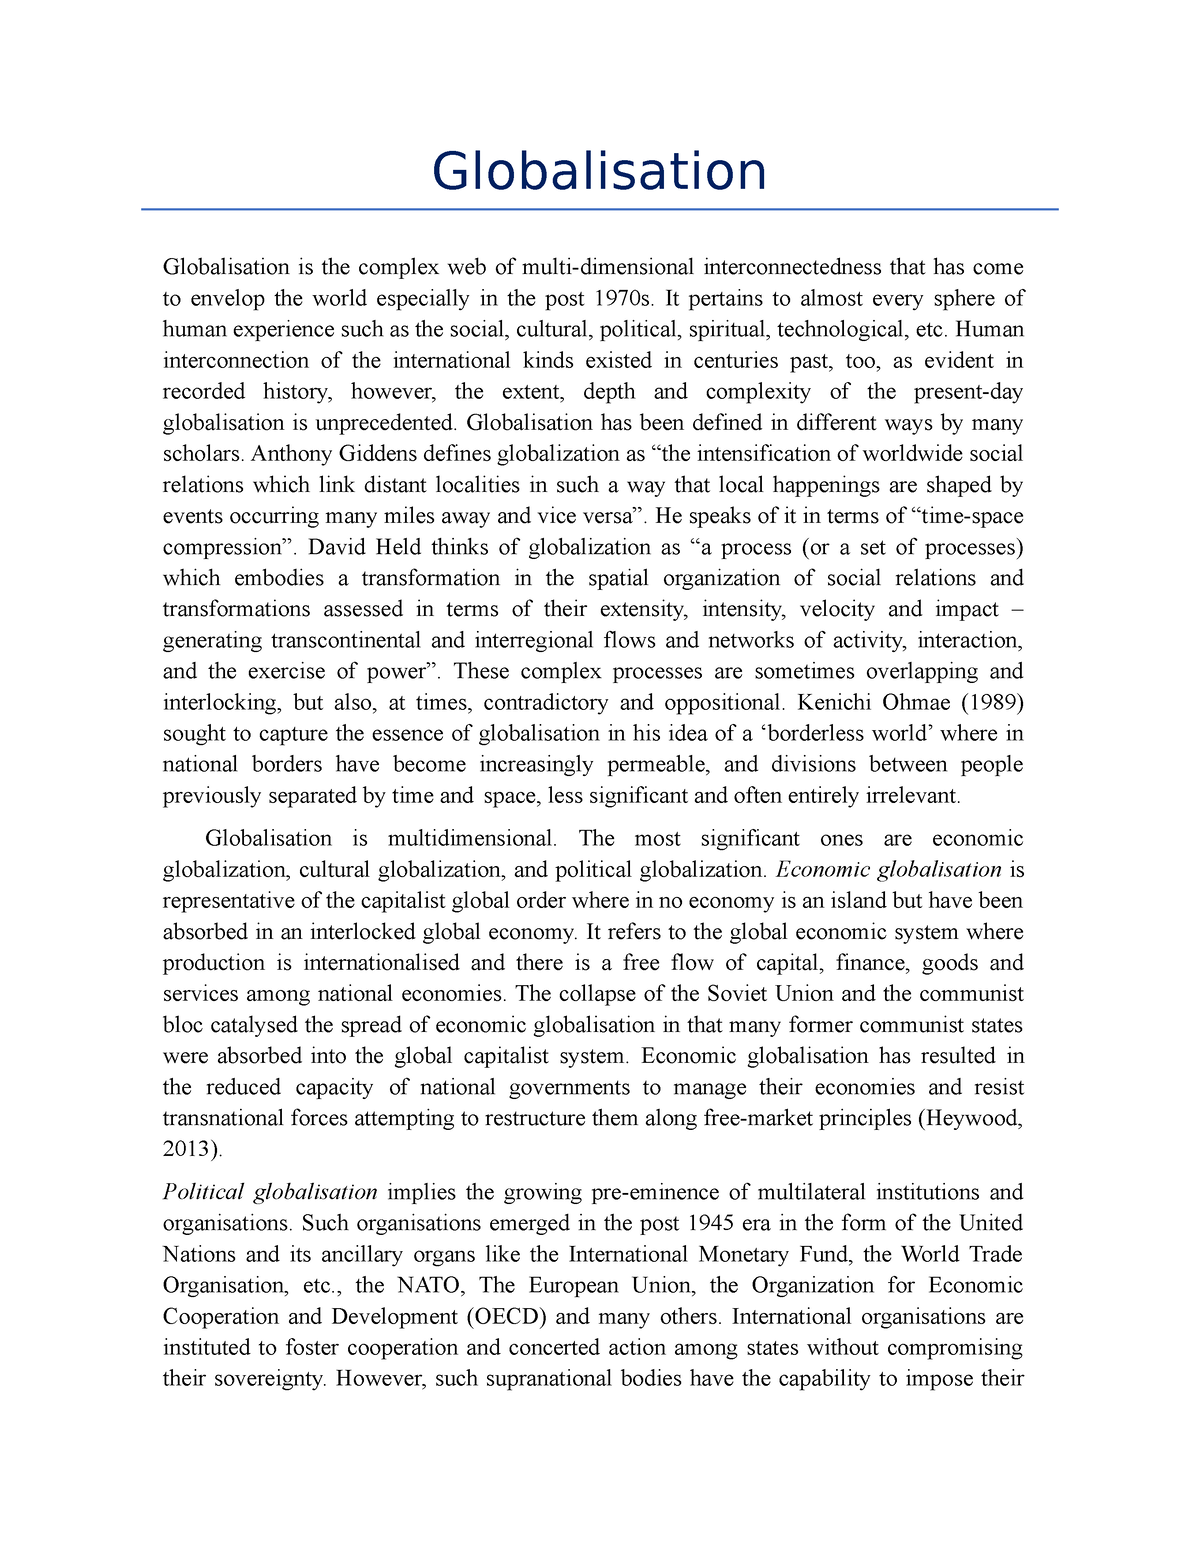 globalization thesis lse